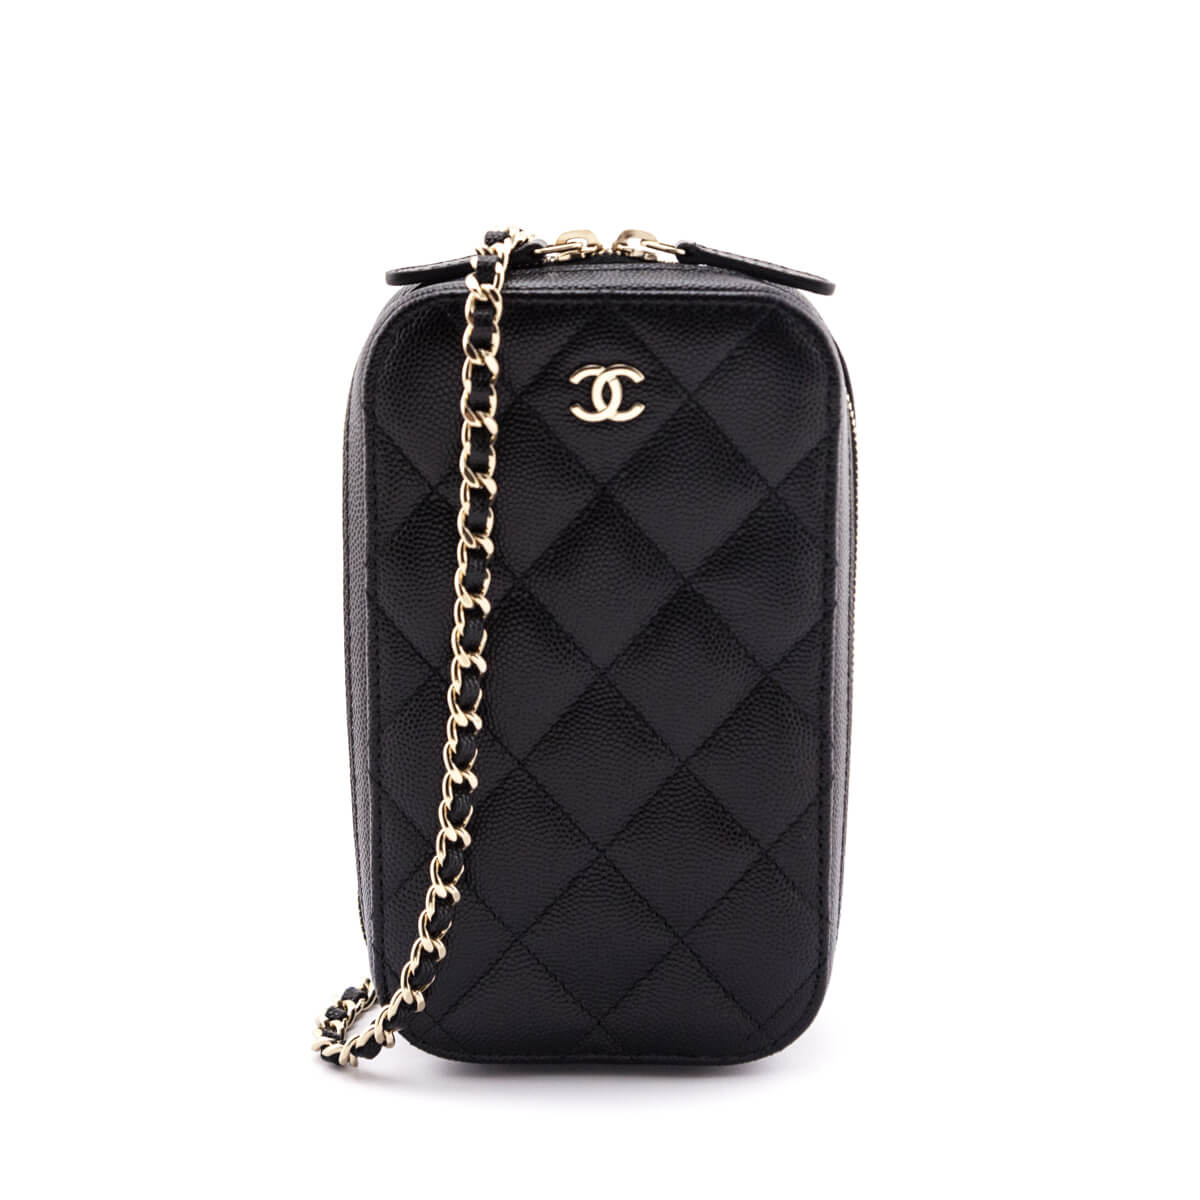 Chanel Phone Cases  iPhone and Android  TeePublic